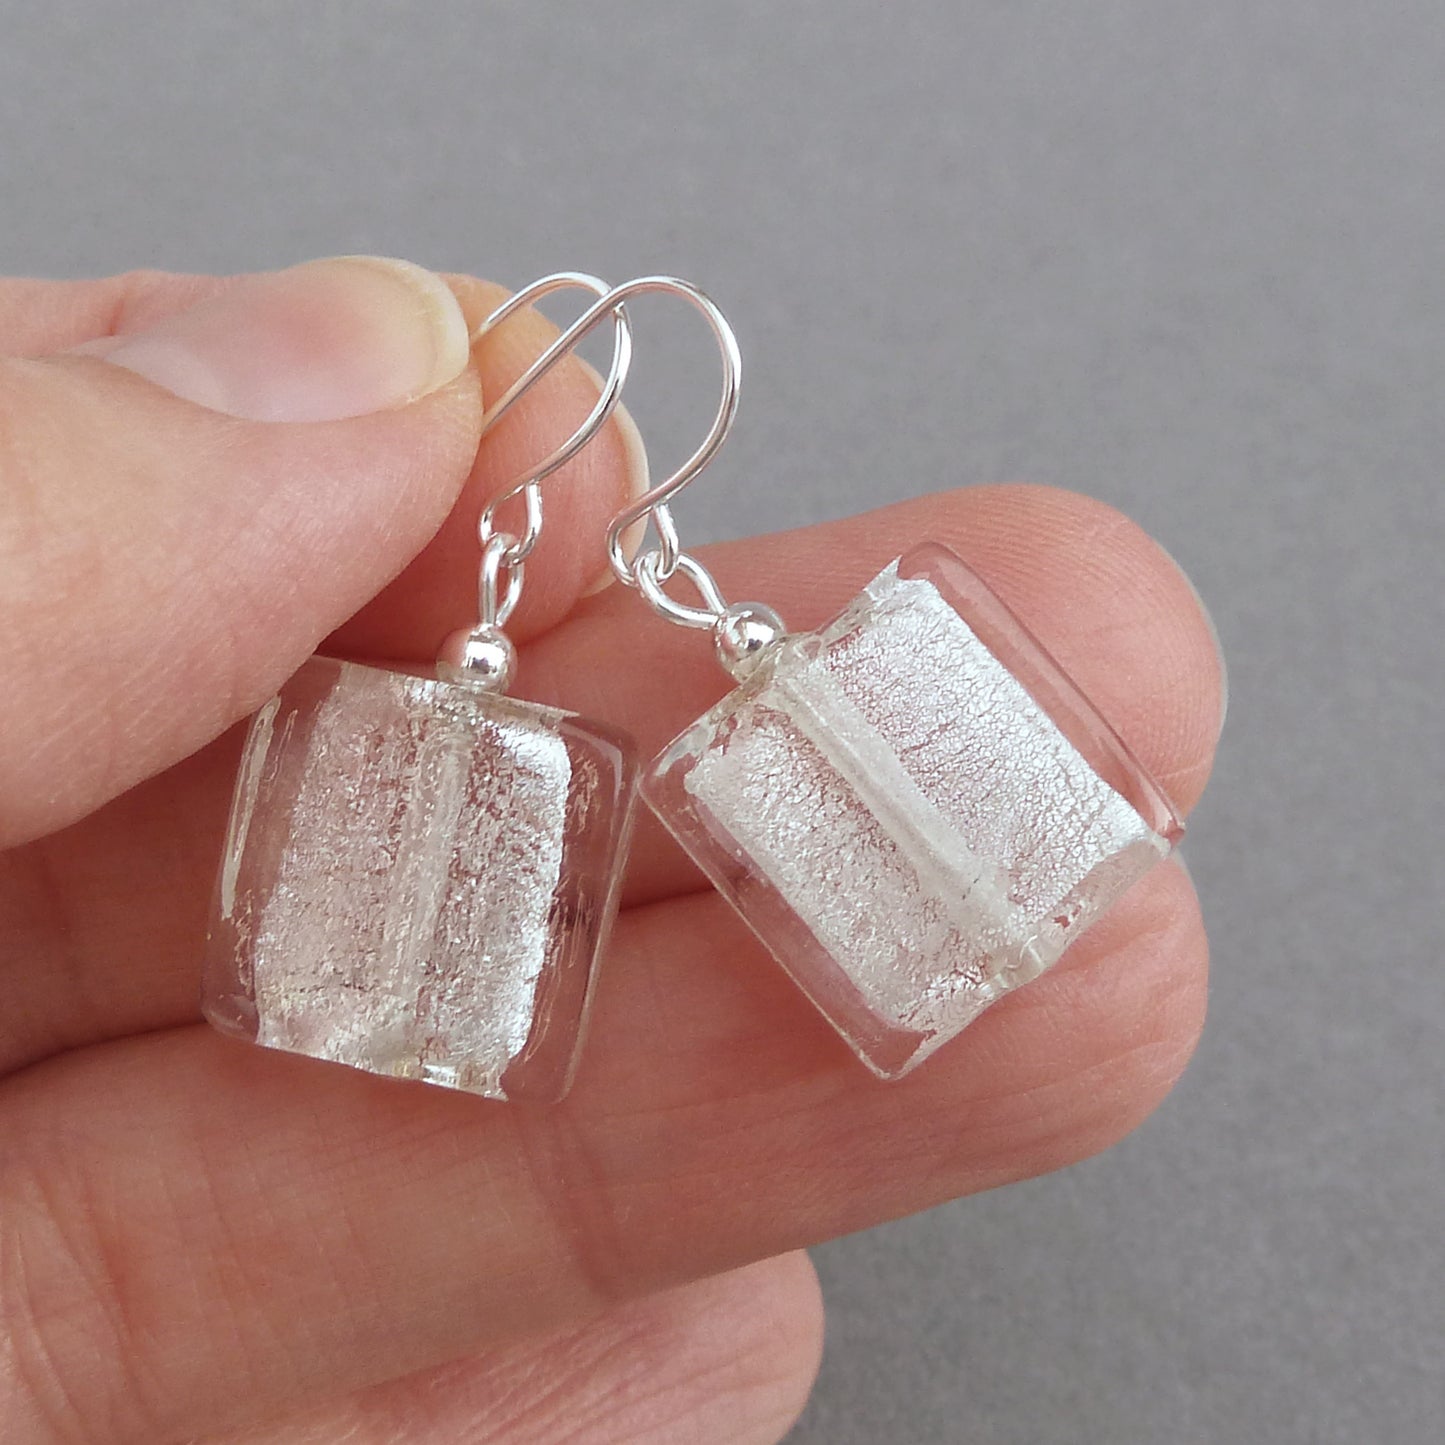 Square fused glass earrings